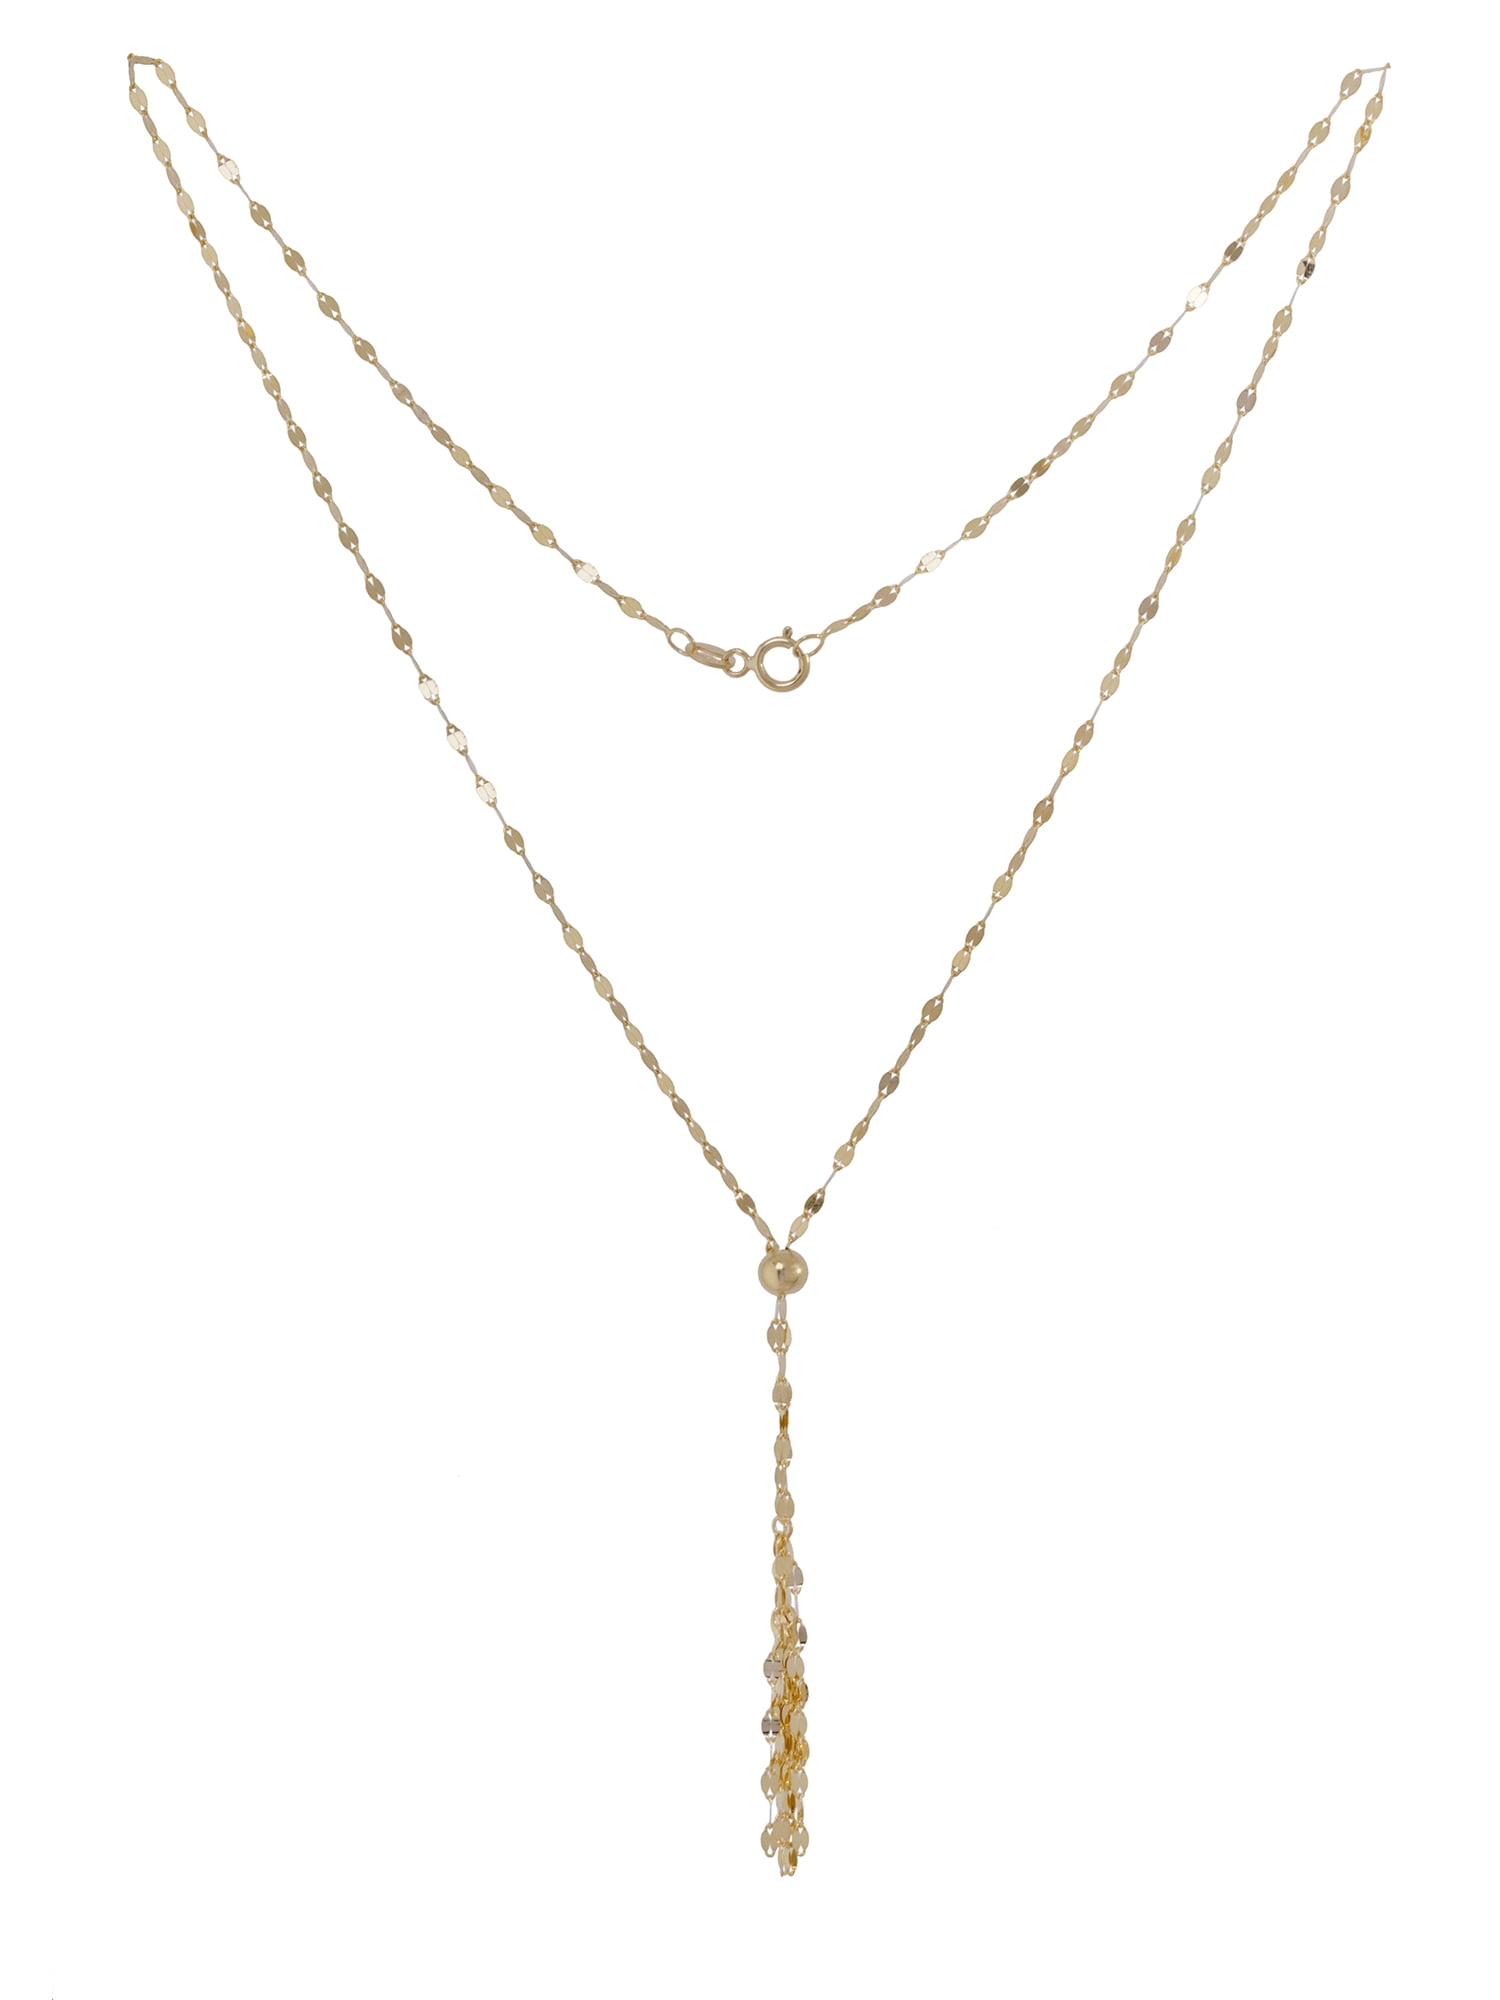 10kt Yellow Gold Tassle Necklace 17